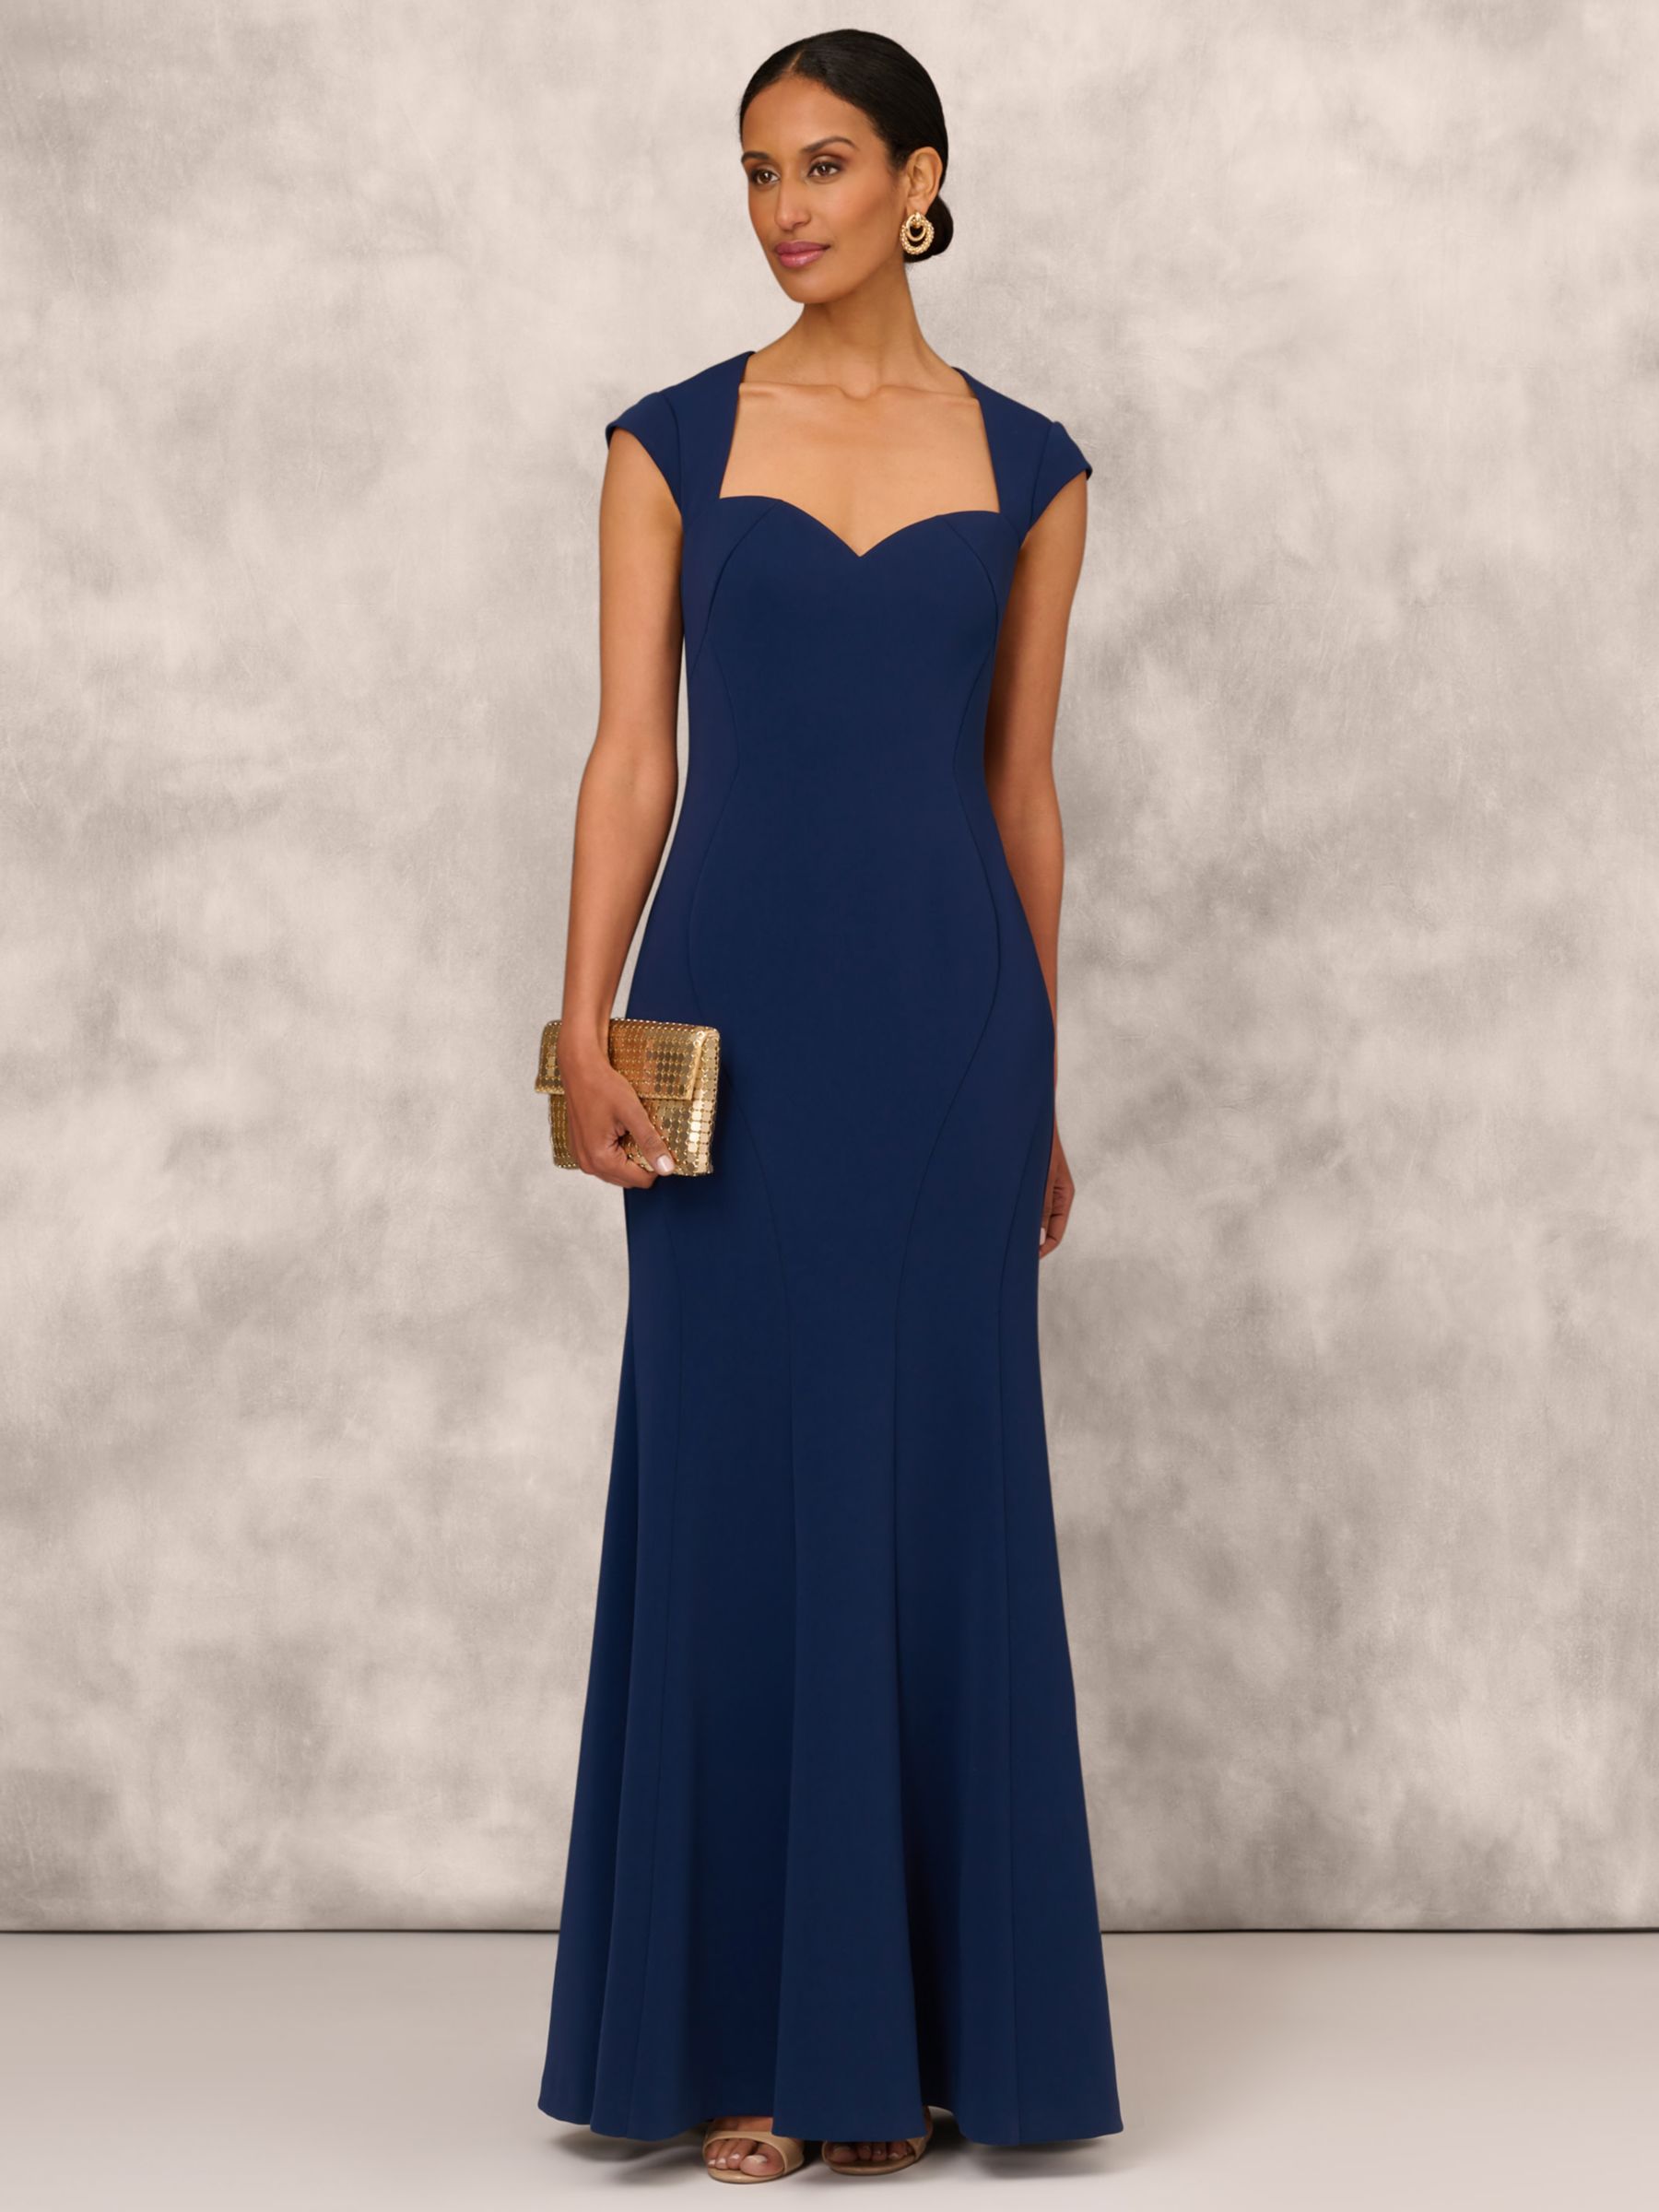 Adrianna Papell Aidan Mattox by Adrianna Papell Cap Sleeve Gown ...